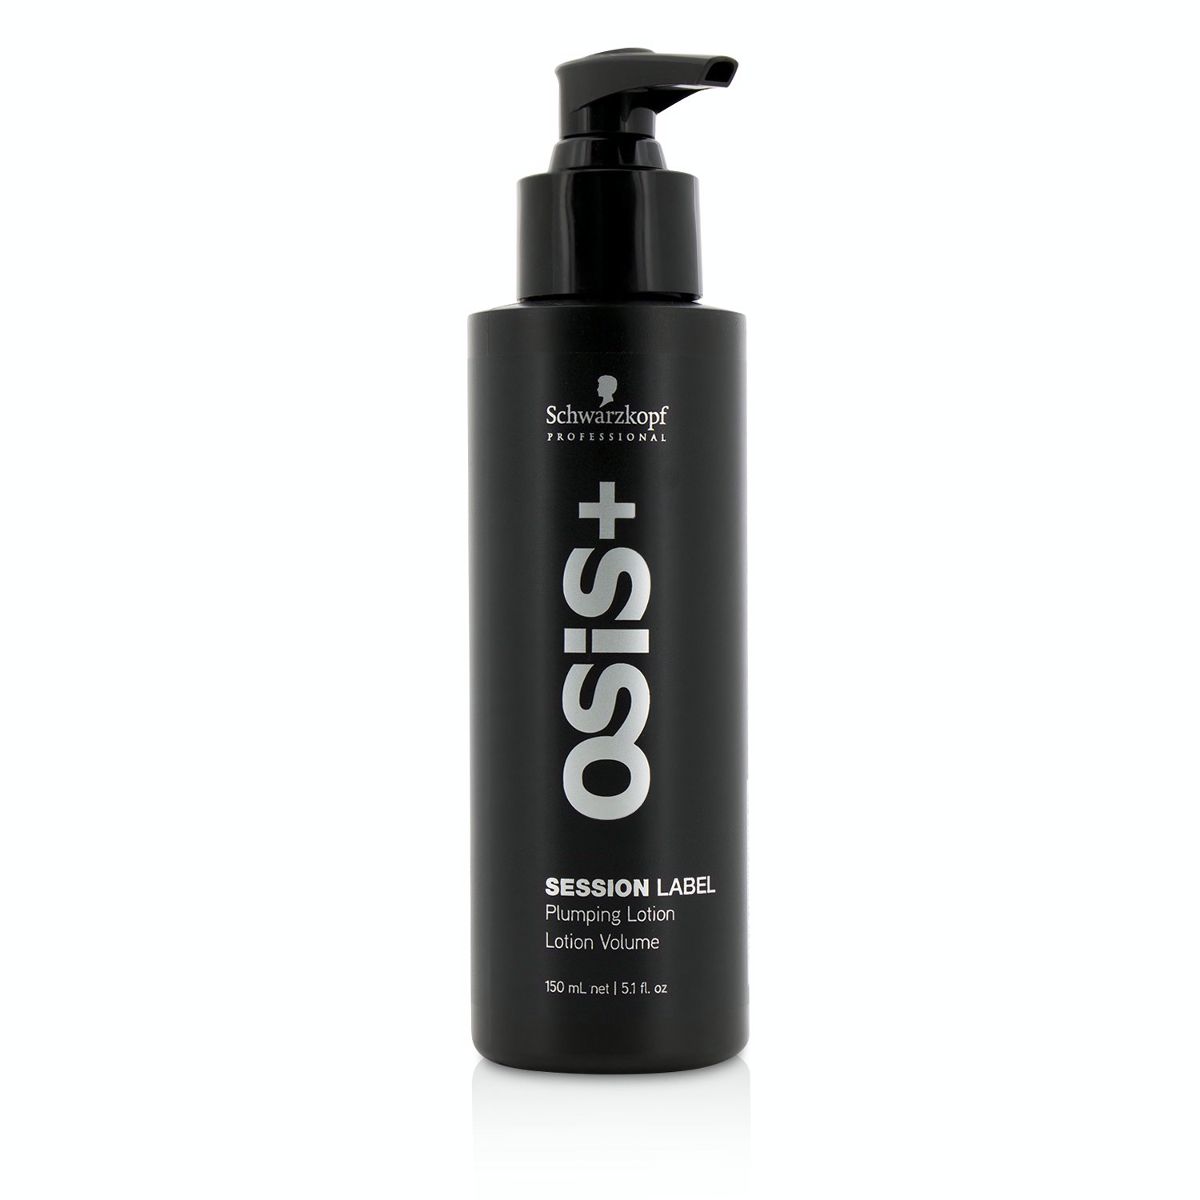 Osis+ Session Label Plumping Lotion Schwarzkopf Image